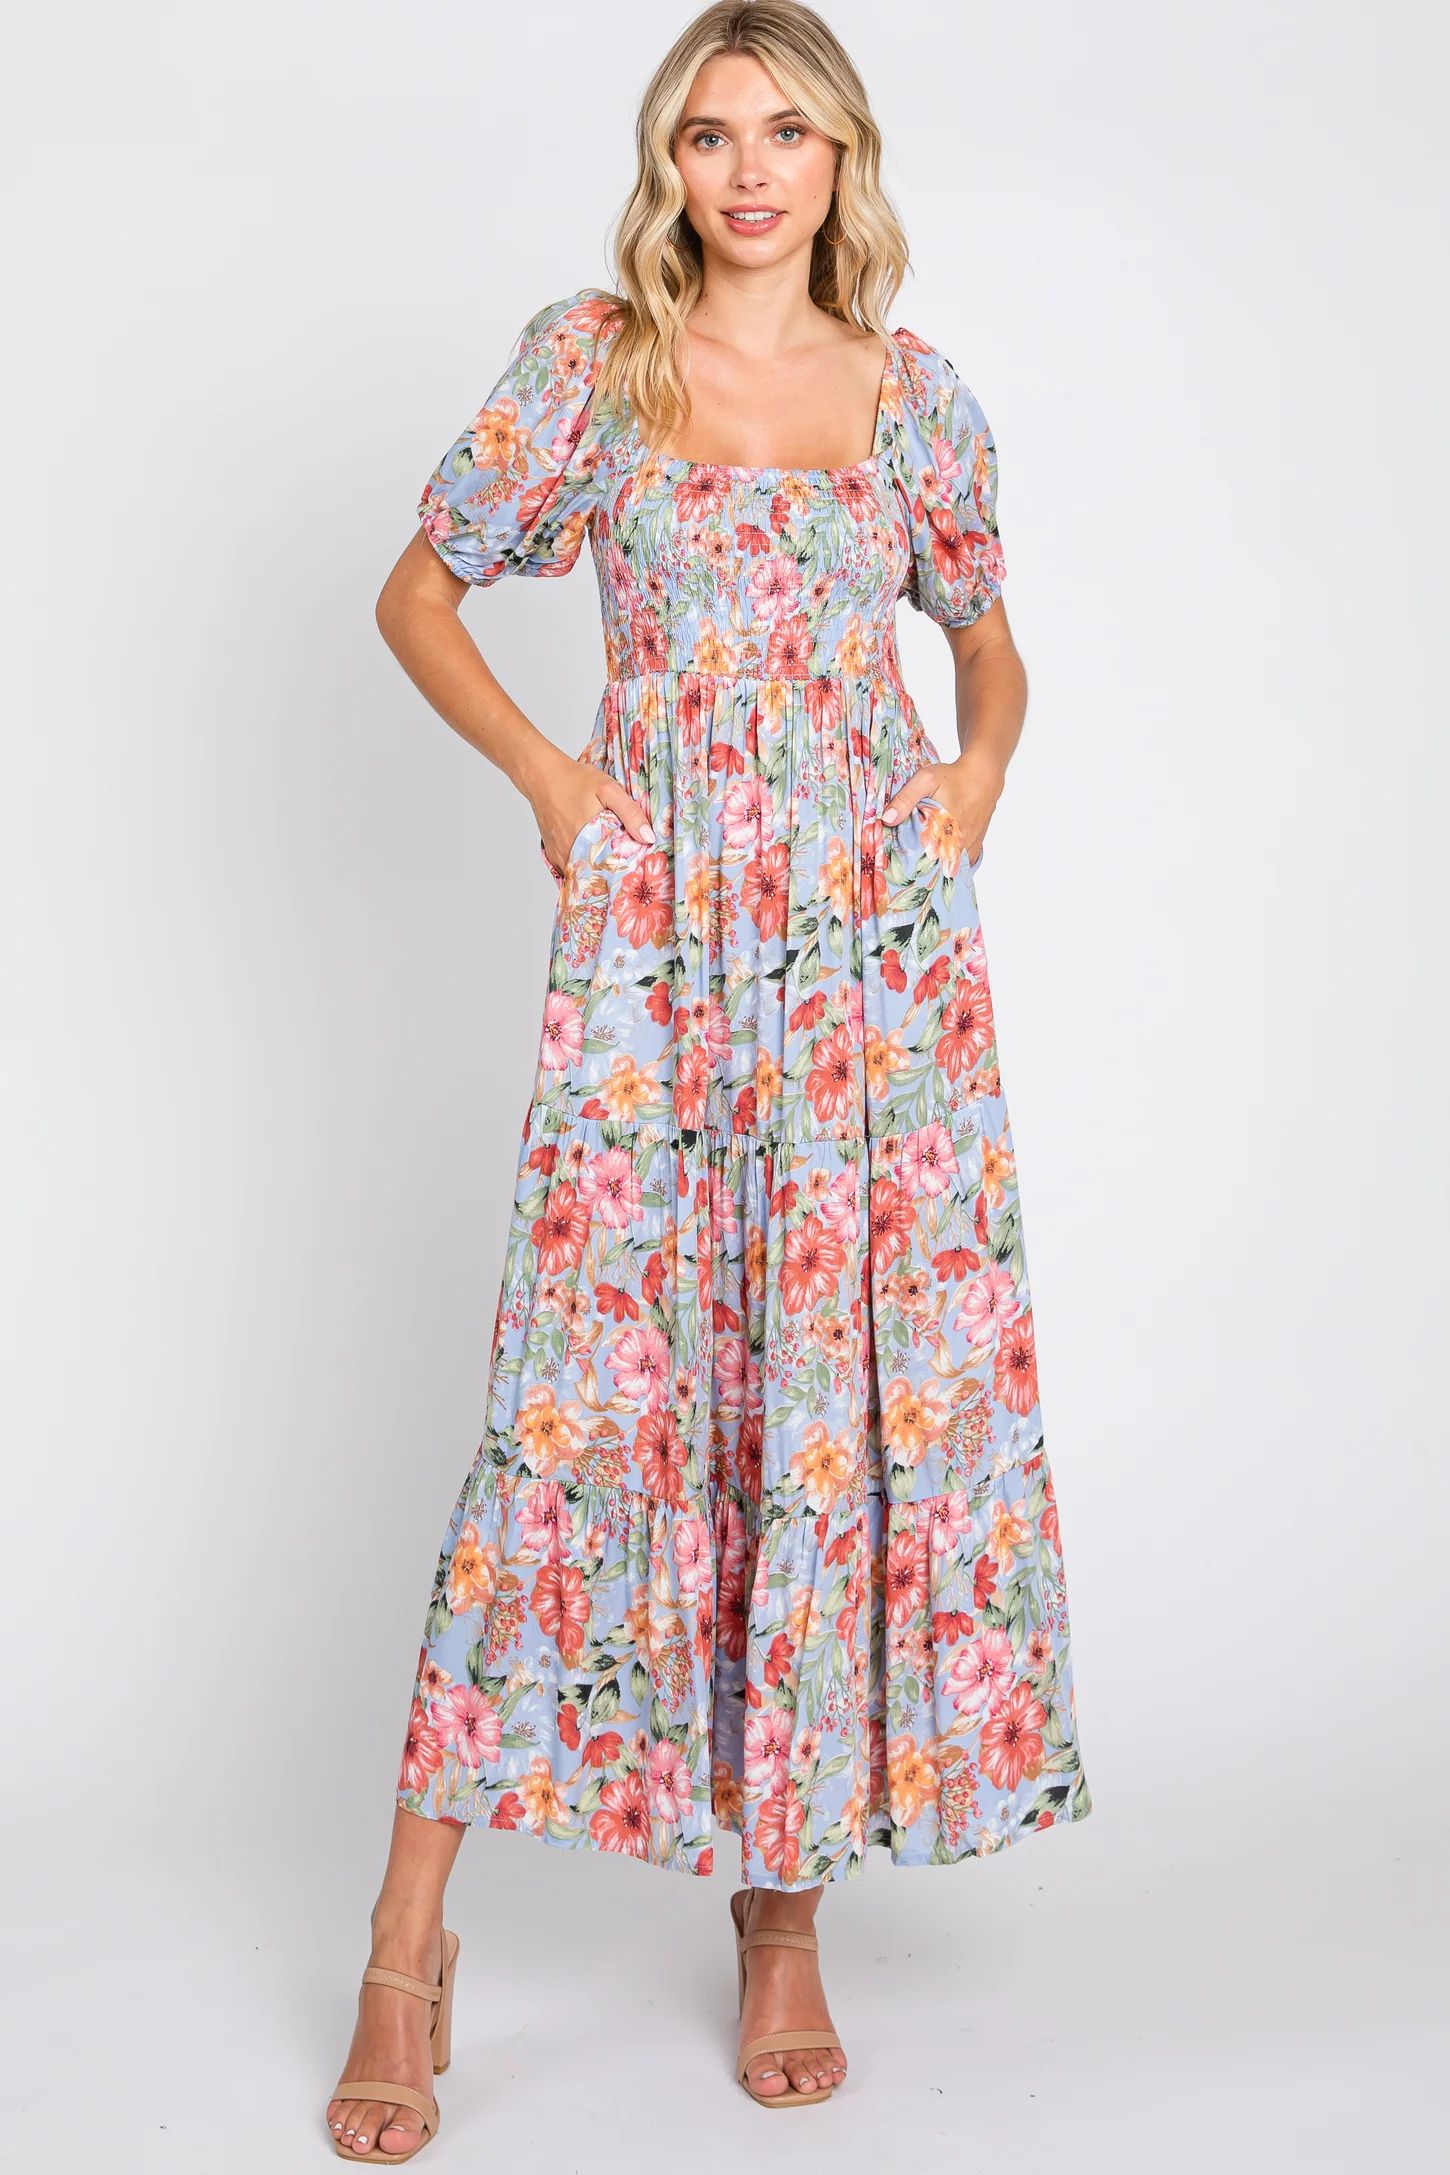 Blue Floral Smocked Square Neck Tiered Maxi Dress | PinkBlush Maternity